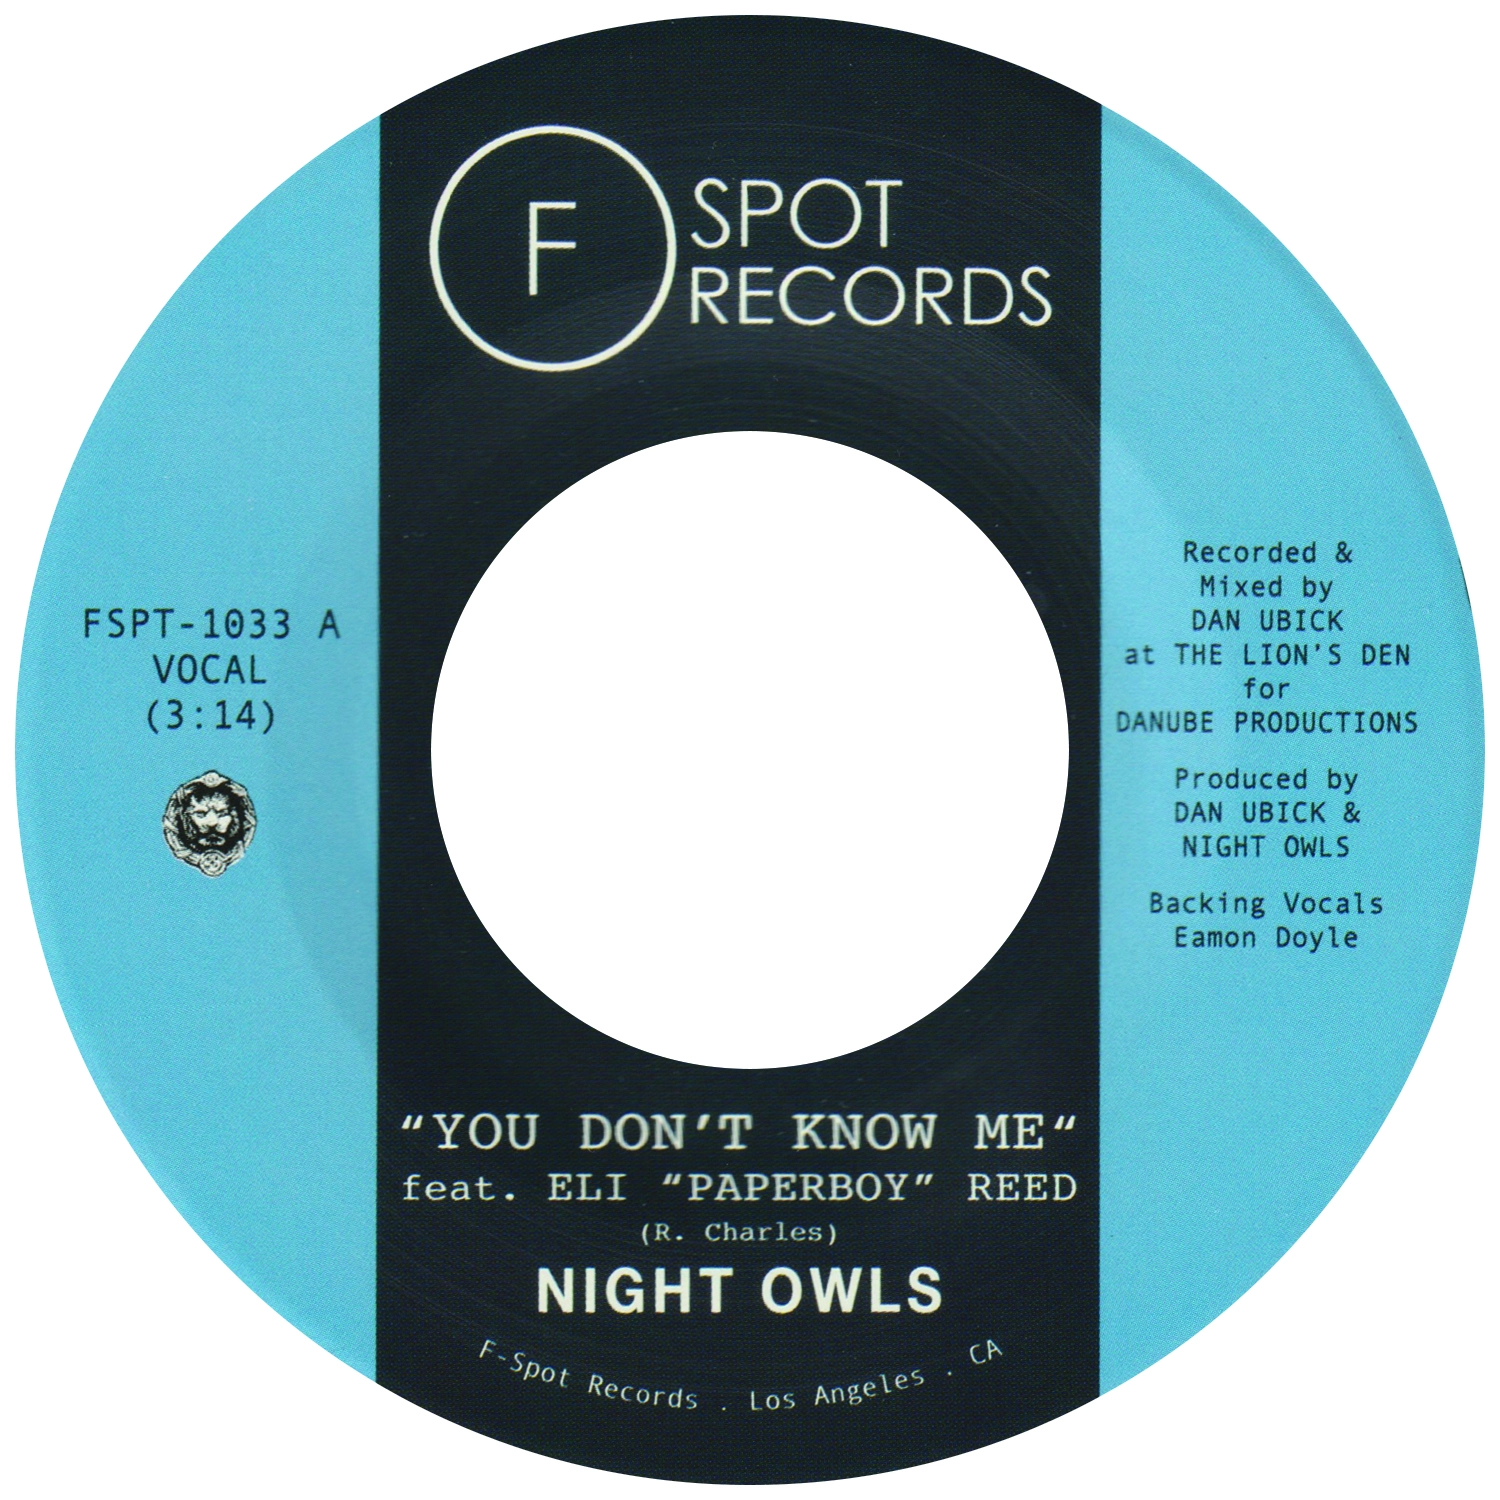 NIGHT OWLS / YOU DON'T KNOW ME (FEAT. ELI PAPERBOY REED)